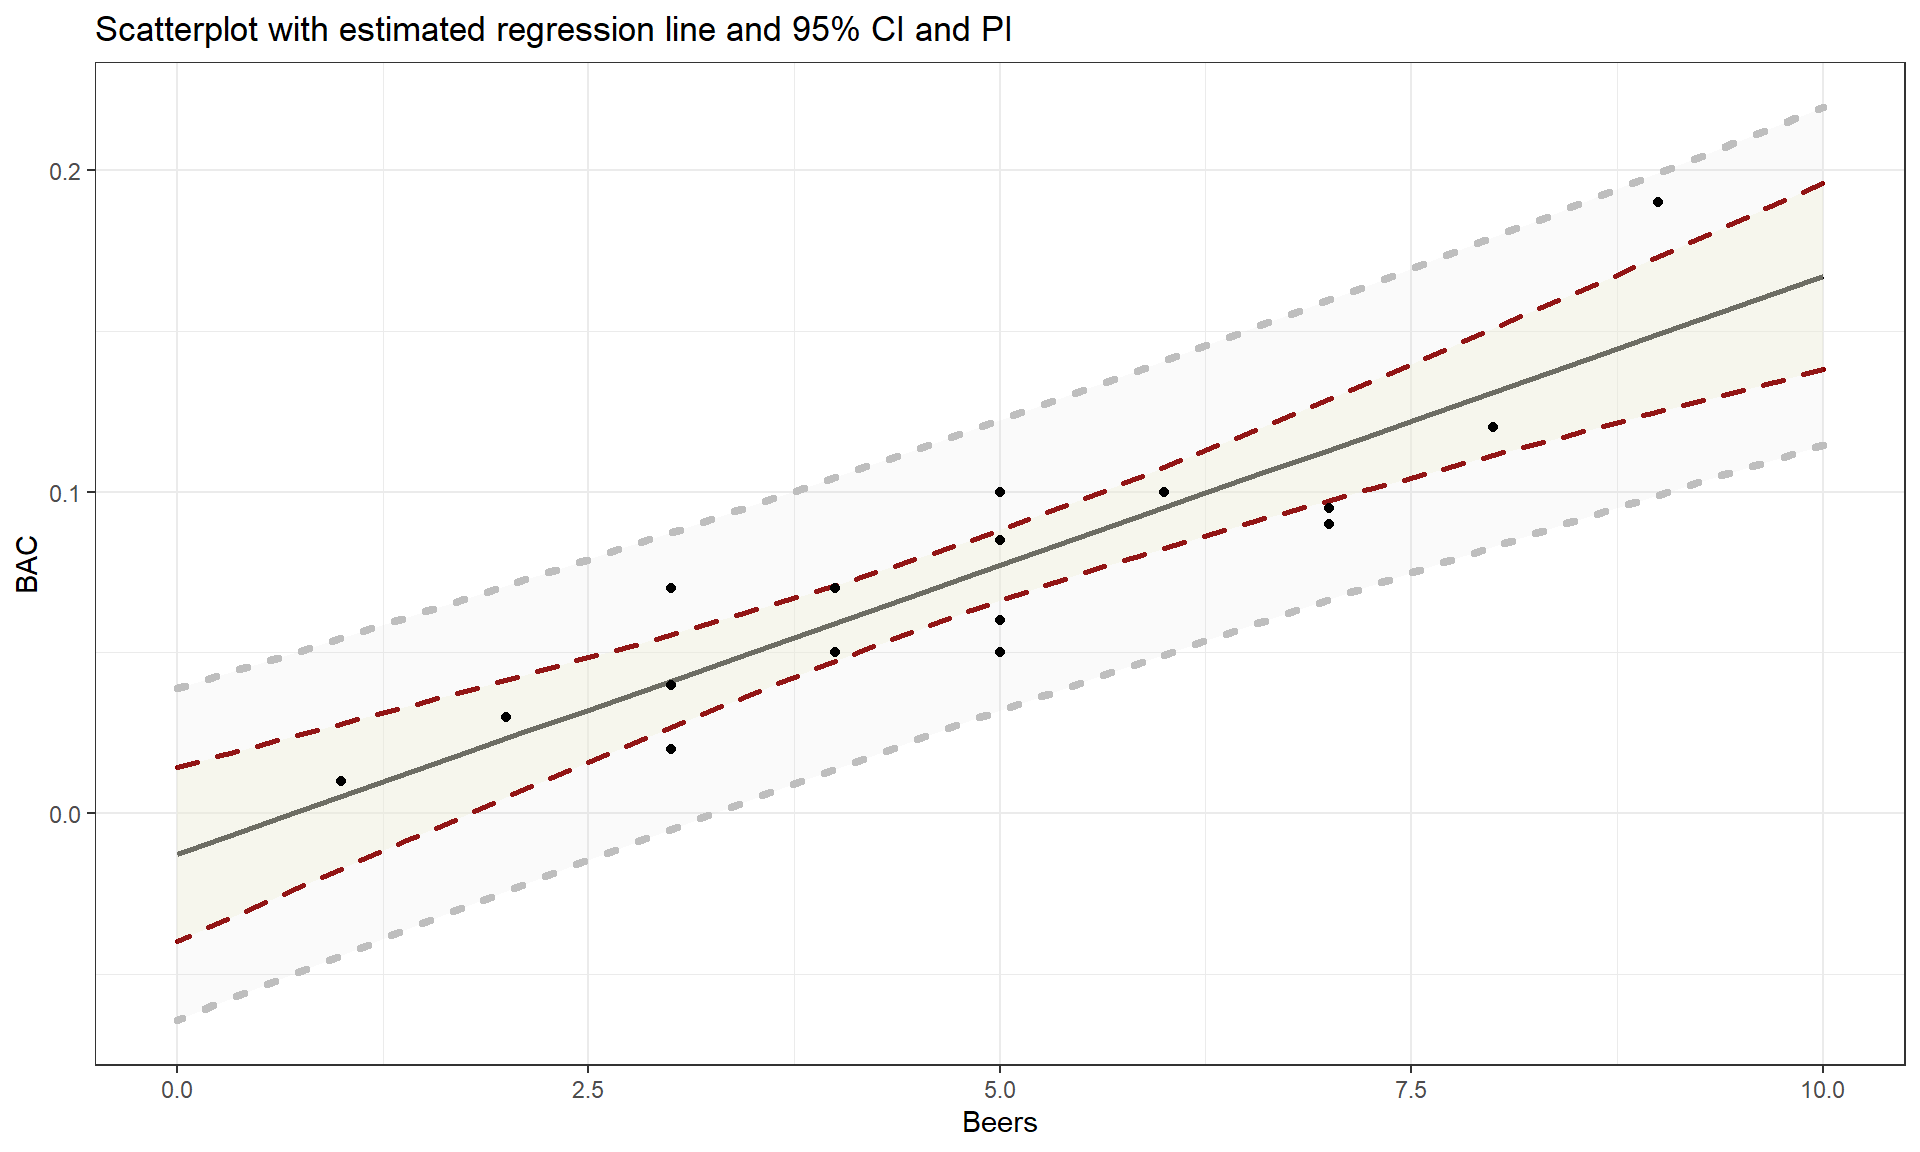 Estimated SLR for BAC data with fitted values (solid line), 95% confidence (darker, dashed lines), and 95% prediction (lighter, dotted lines) intervals.